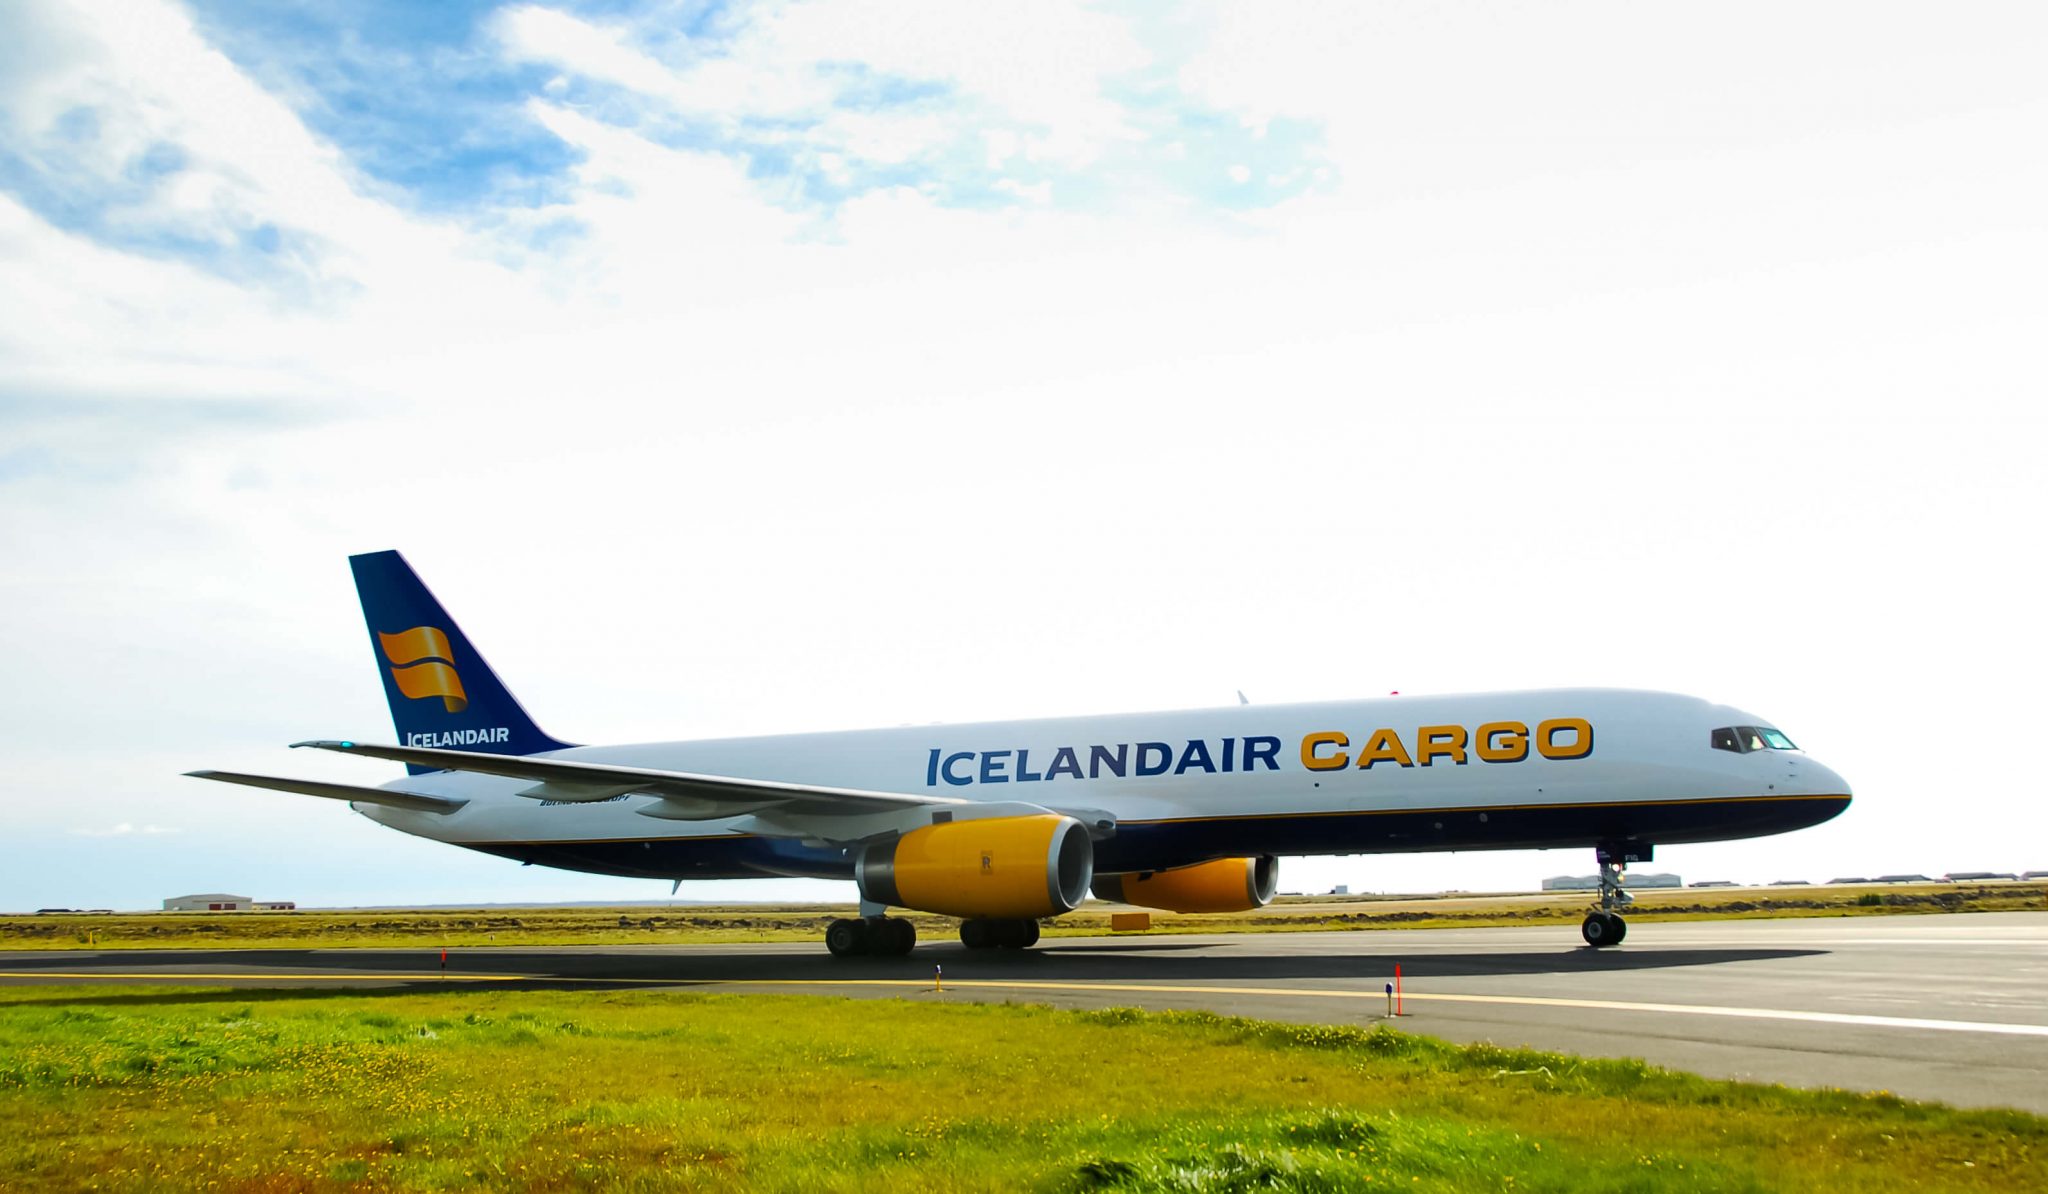 Monarch Aircraft Engineering secures Icelandair as a new base maintenance customer